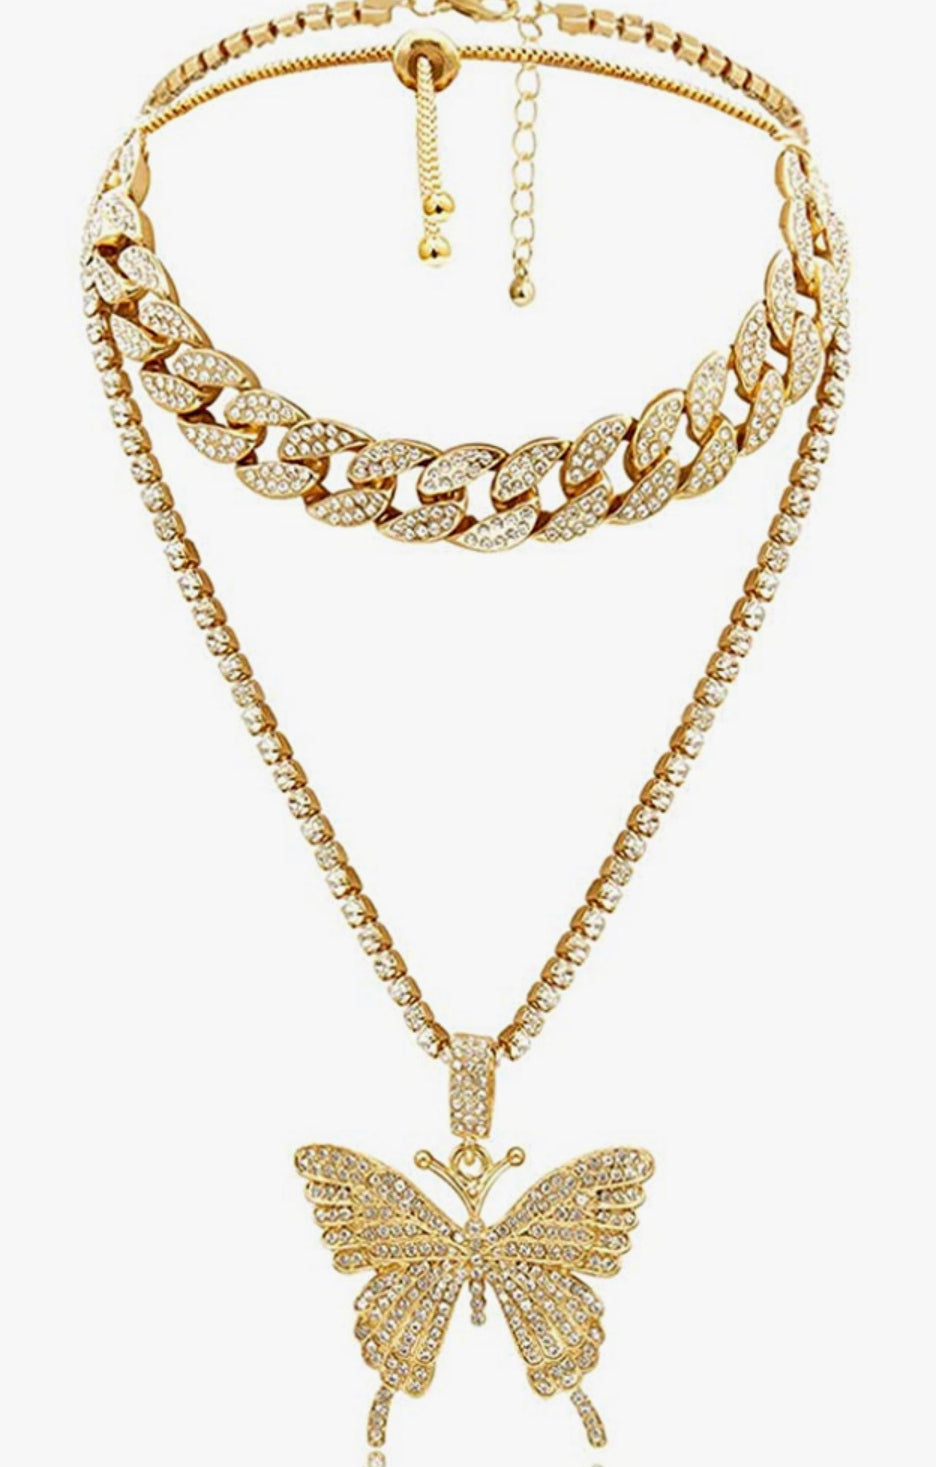 Cuban butterfly double necklace